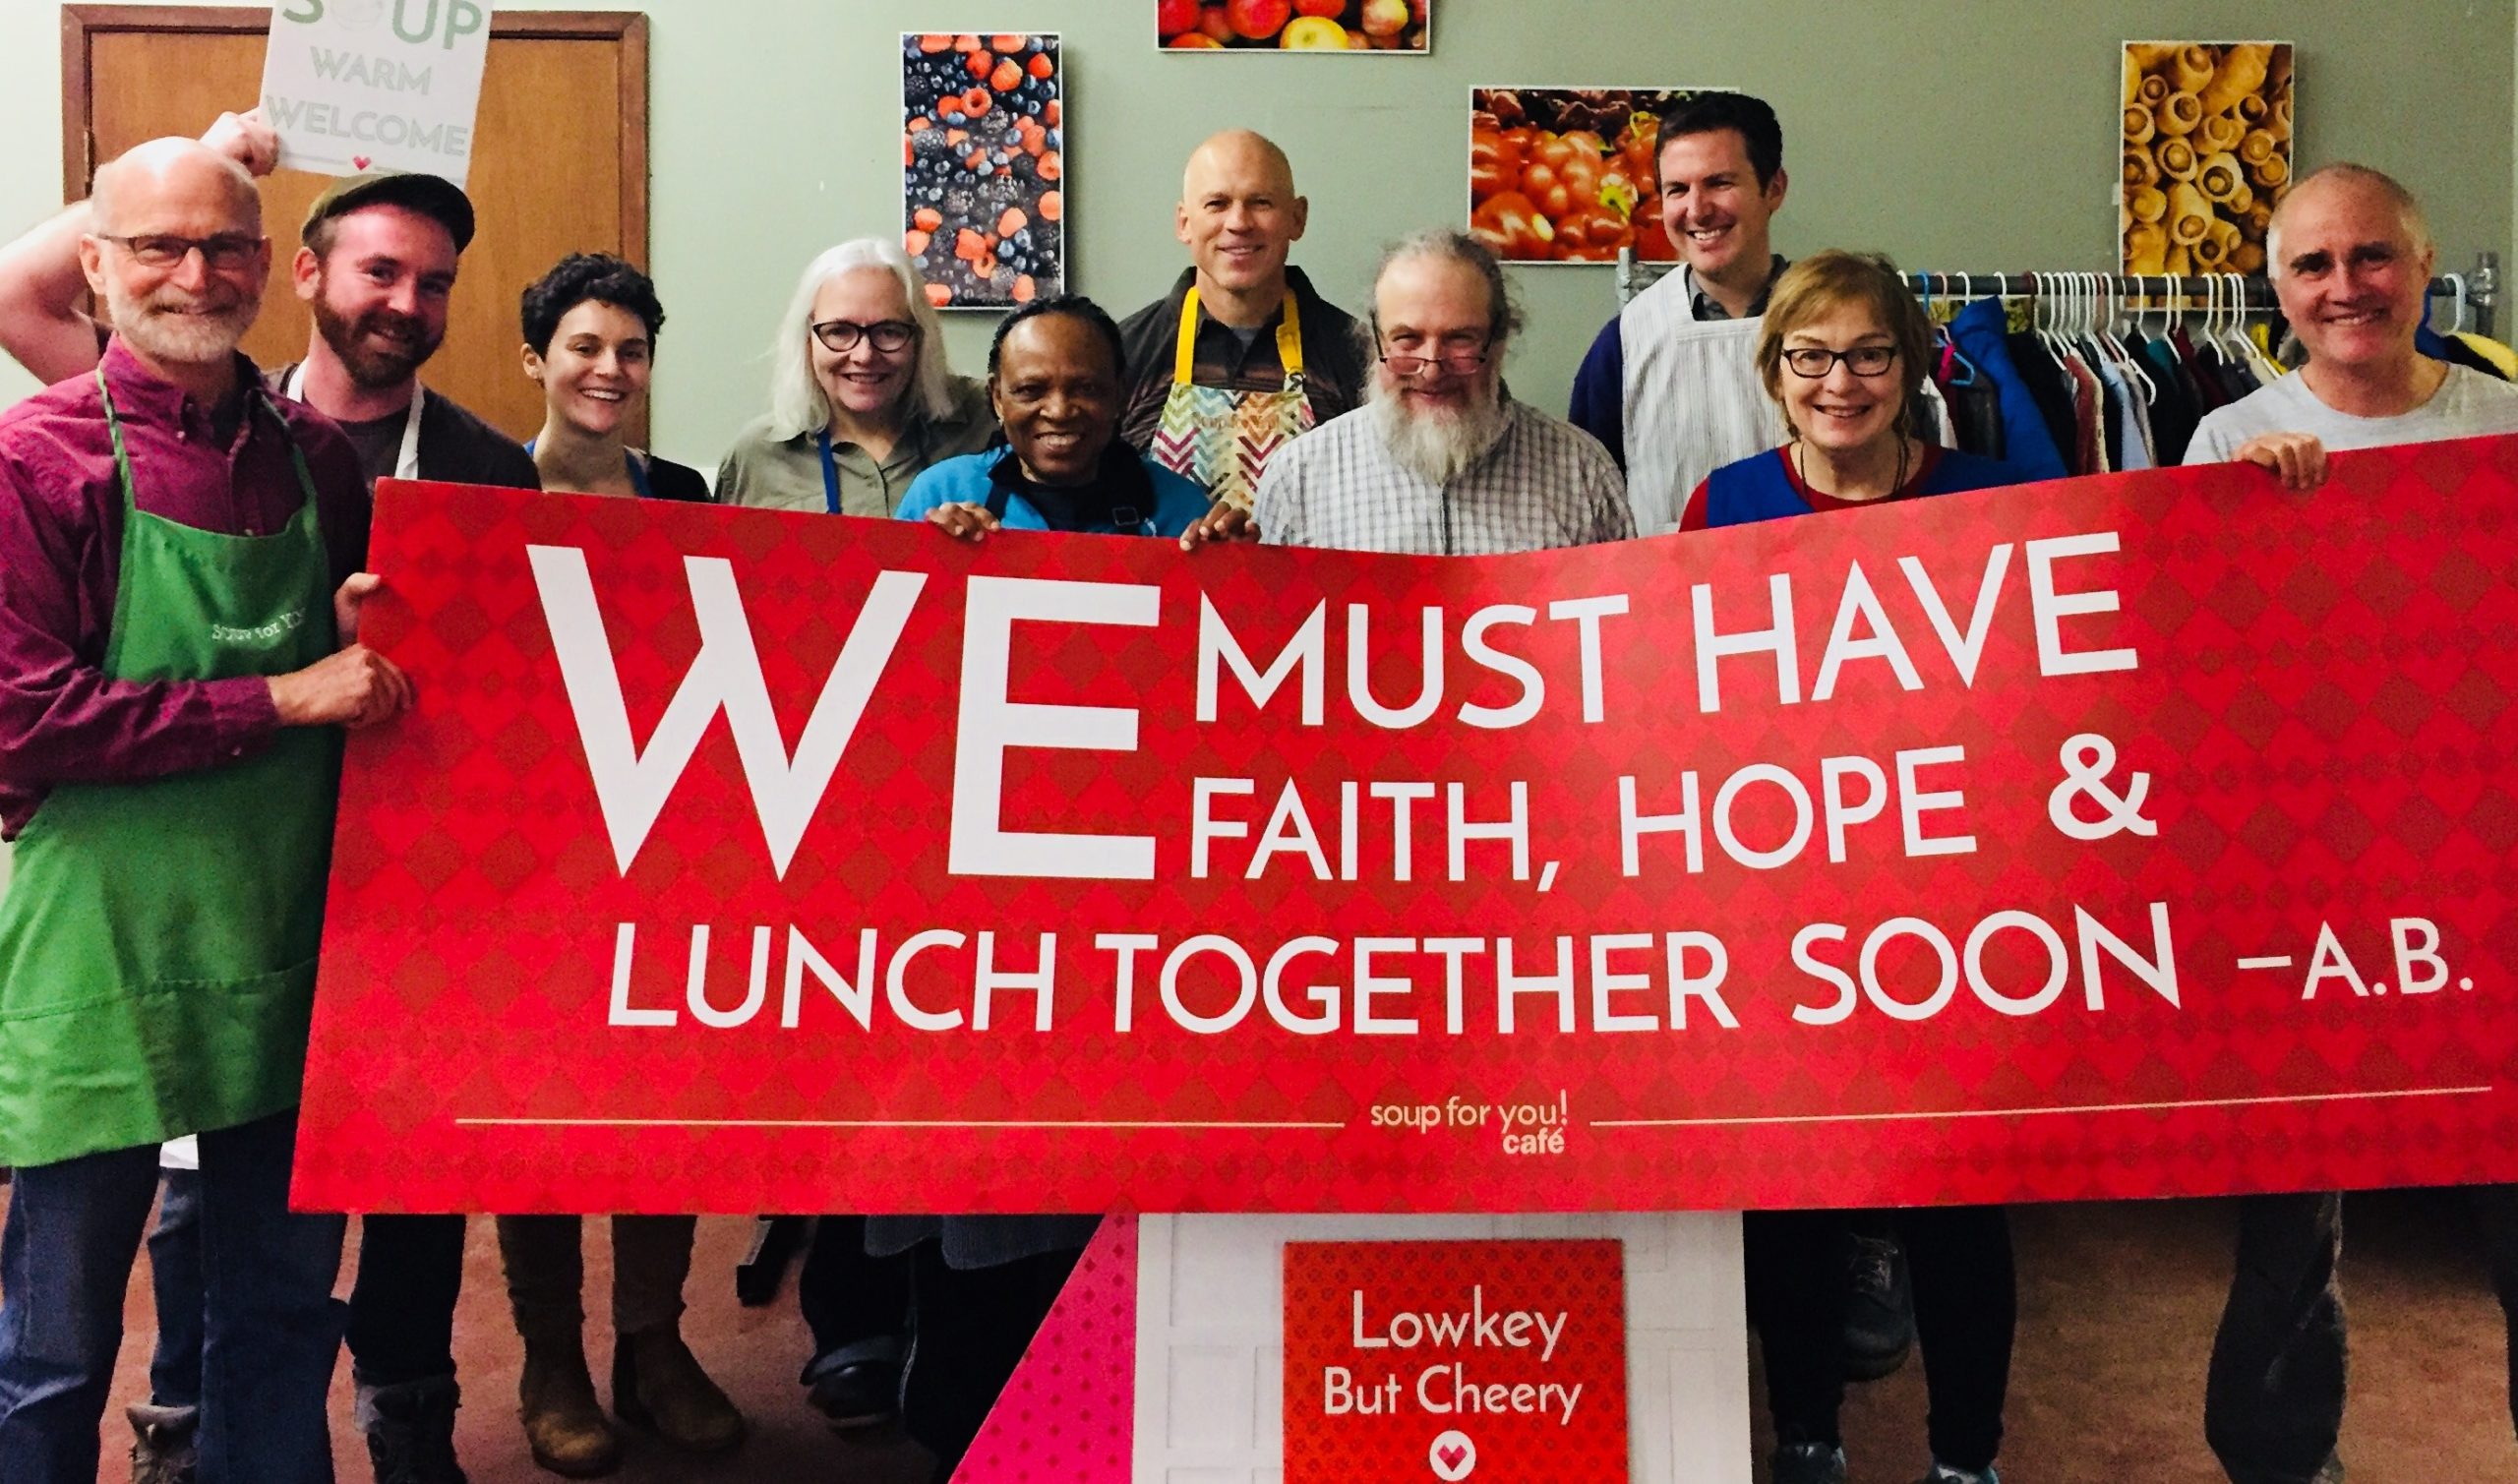 People holding a banner that reads We must have faith, hope and lunch together soon - A.B.